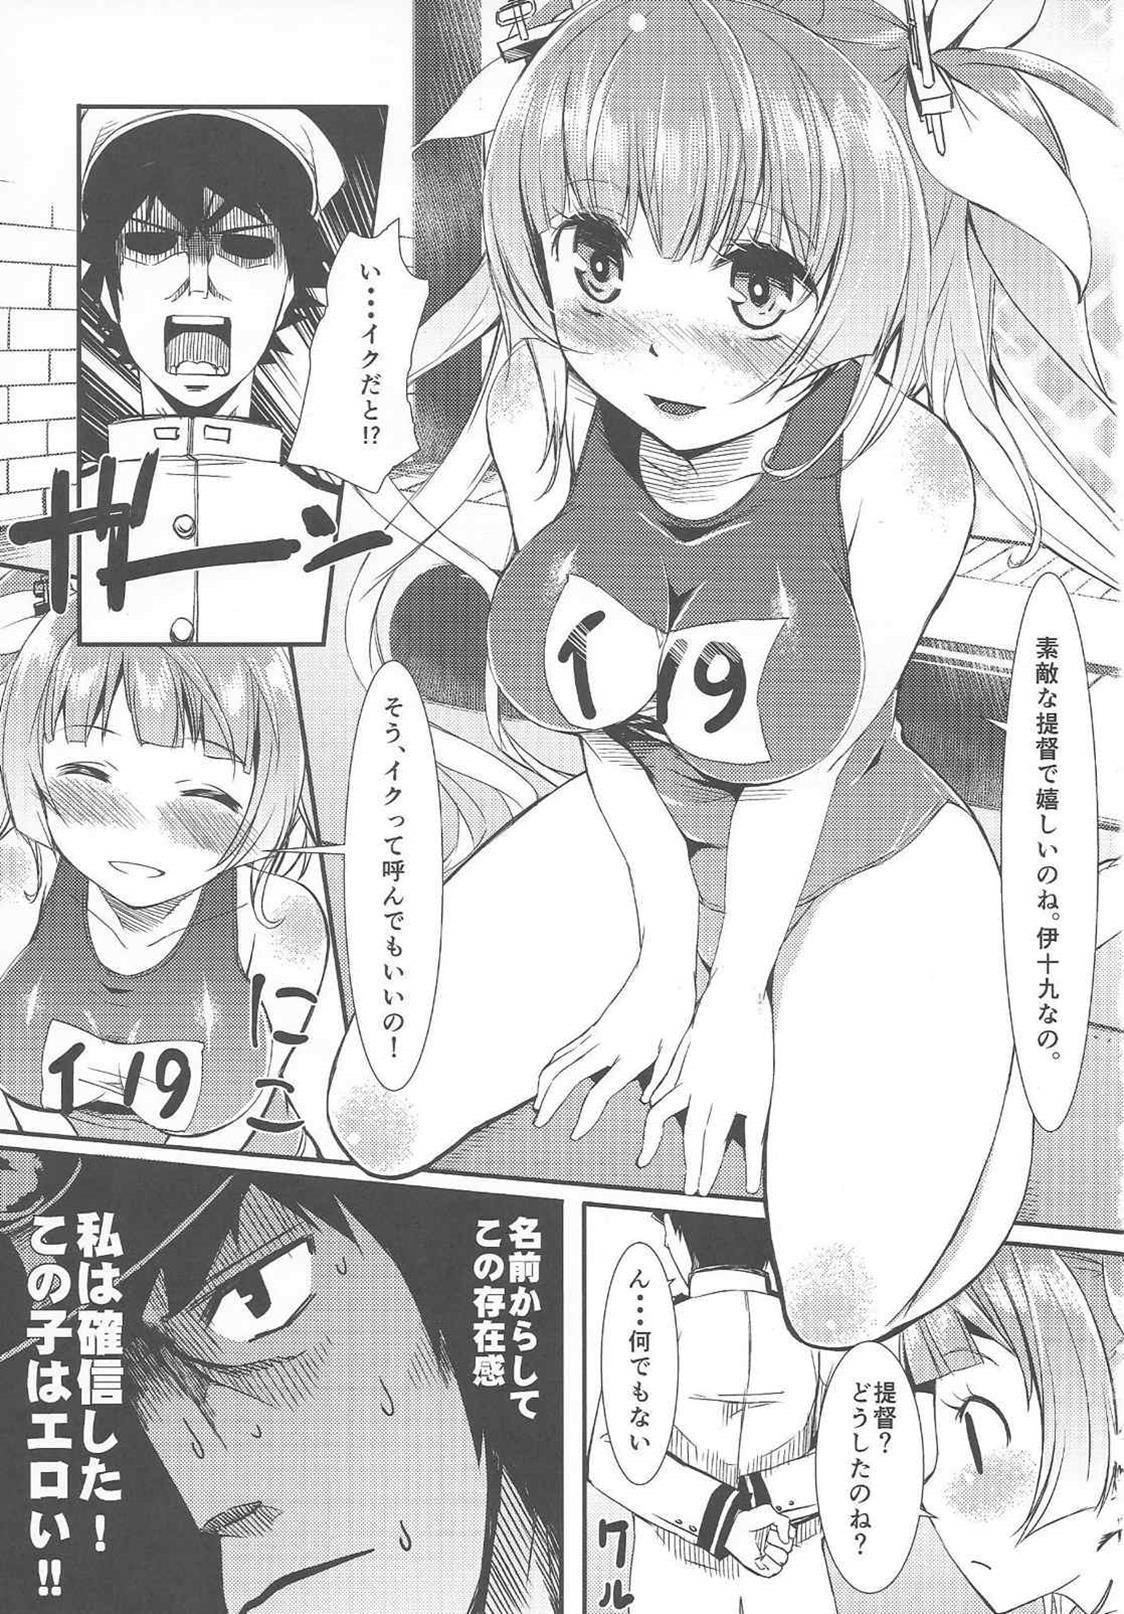 Belly 1919 - Kantai collection Nipples - Page 2